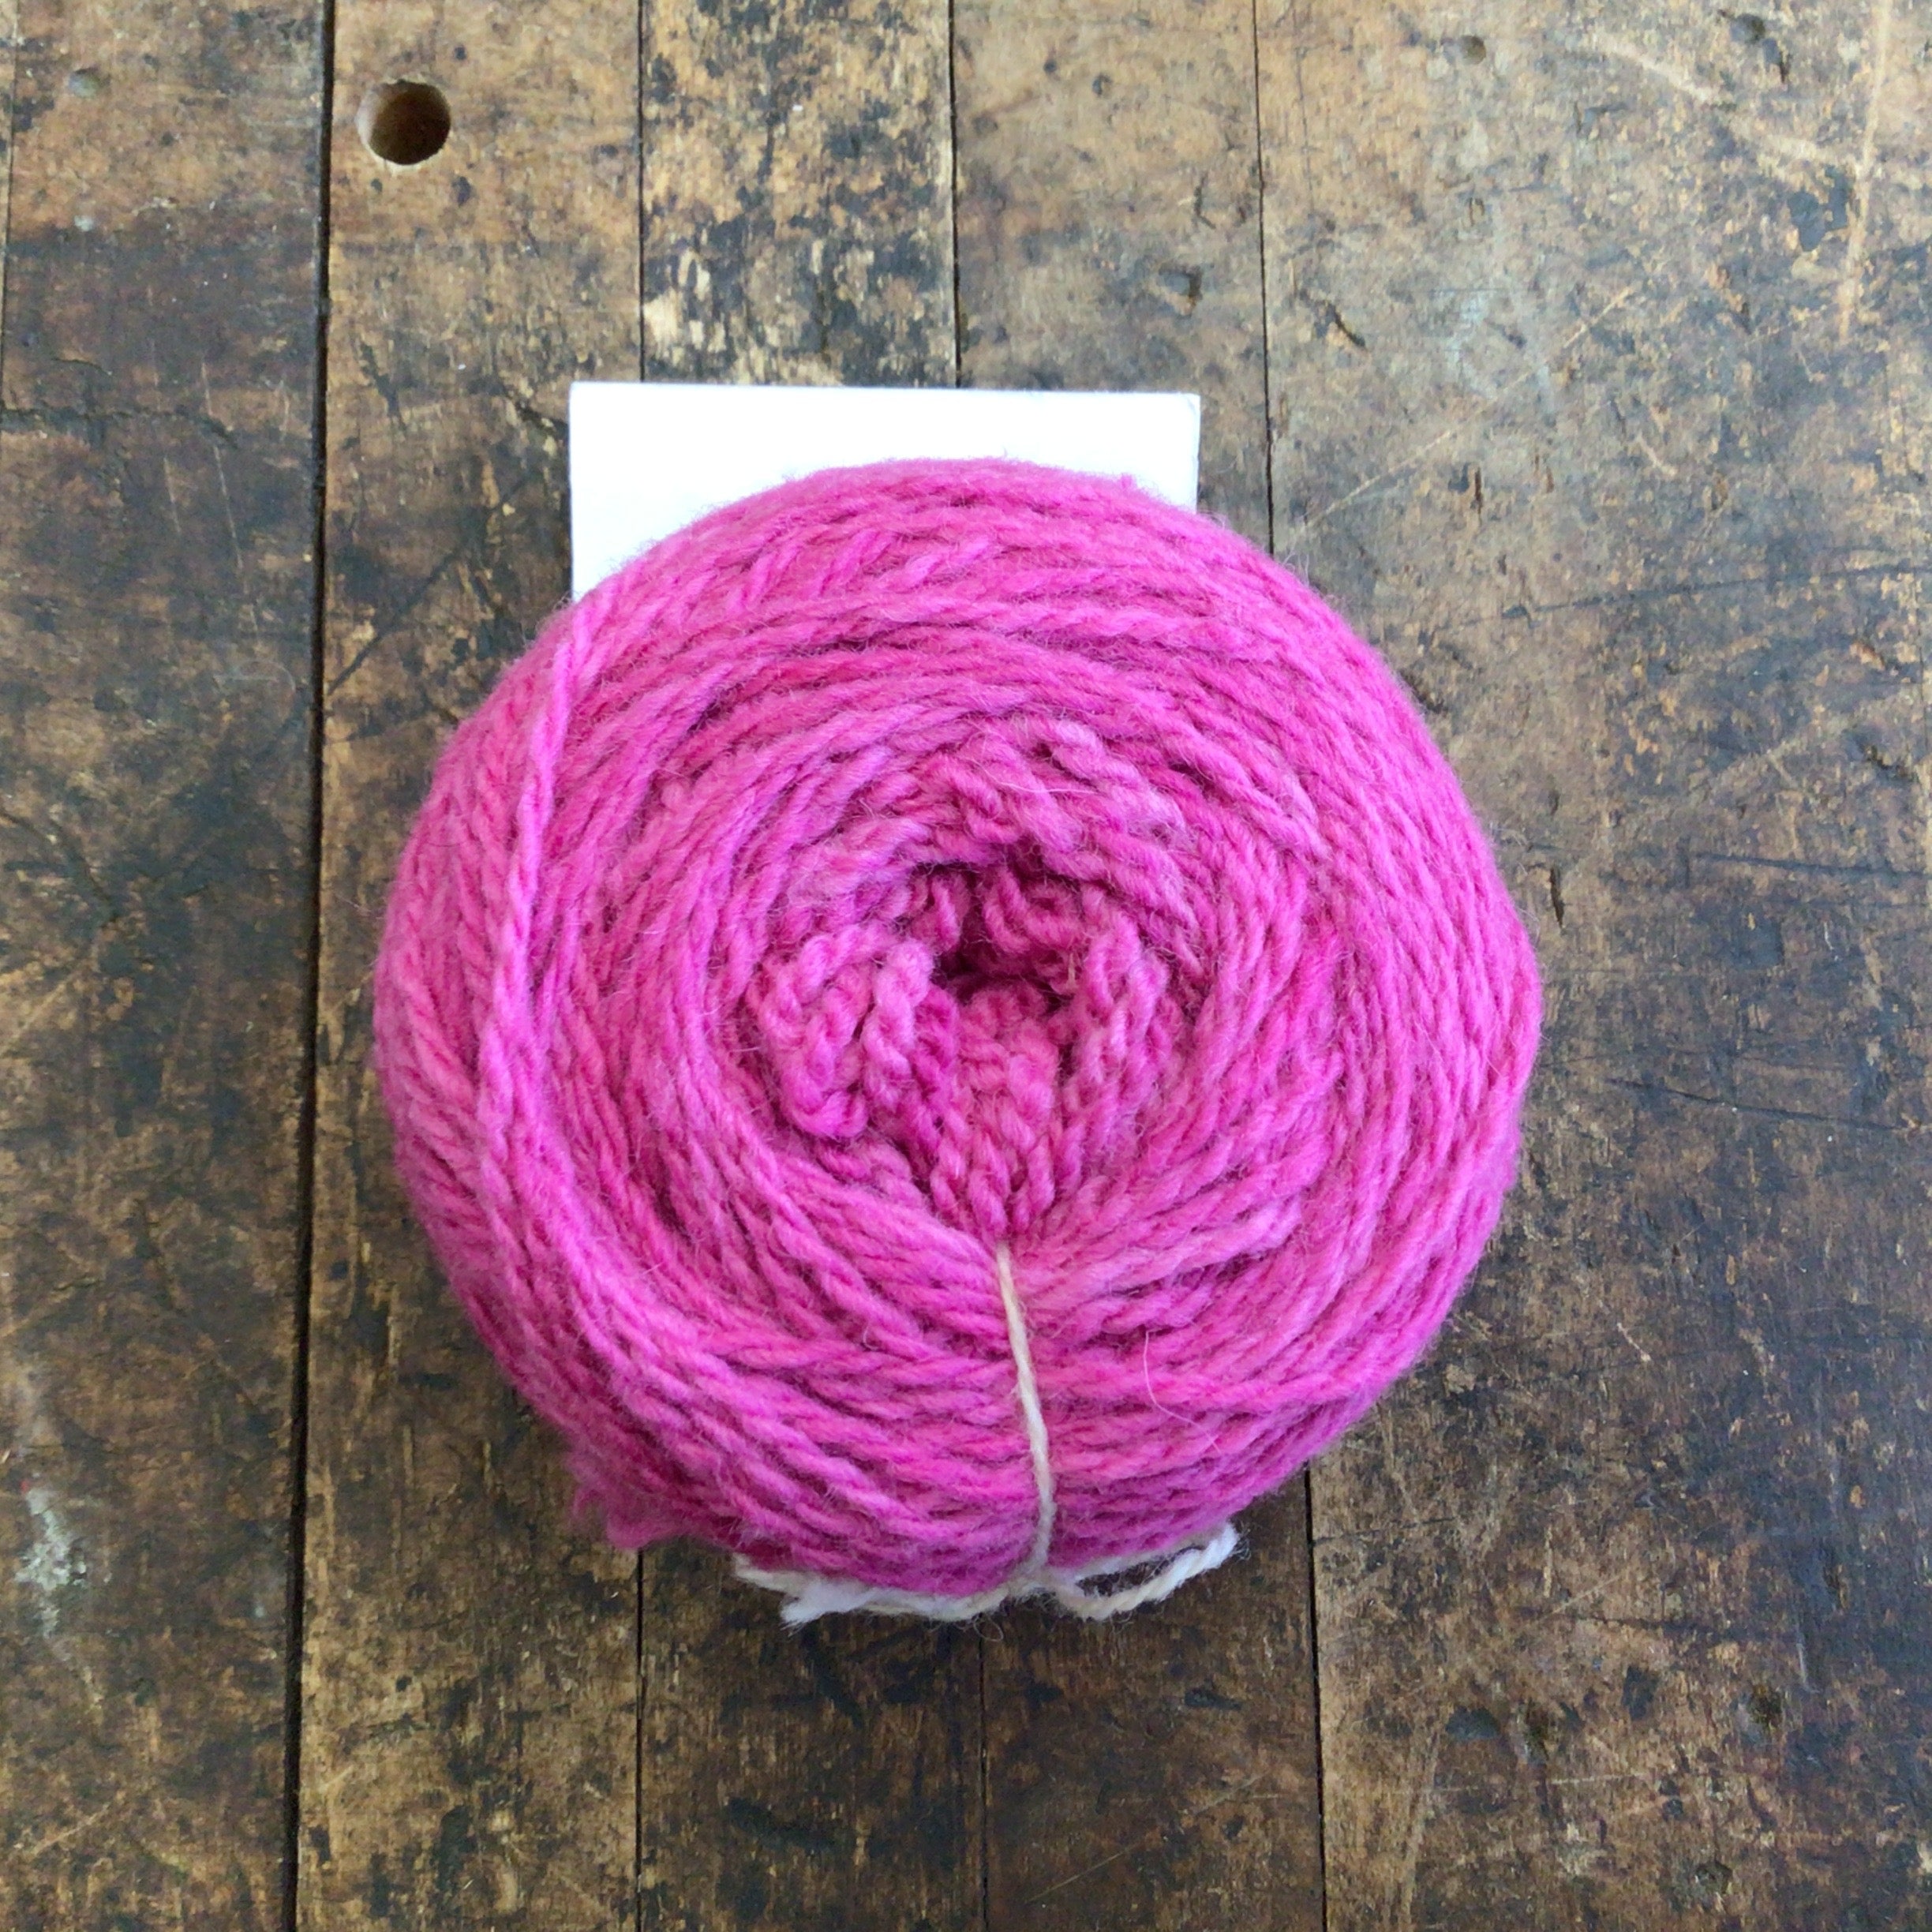 Tronstad Ranch Hand Rambouillet 2 Ply Worsted Weight Yarn - Fuschia